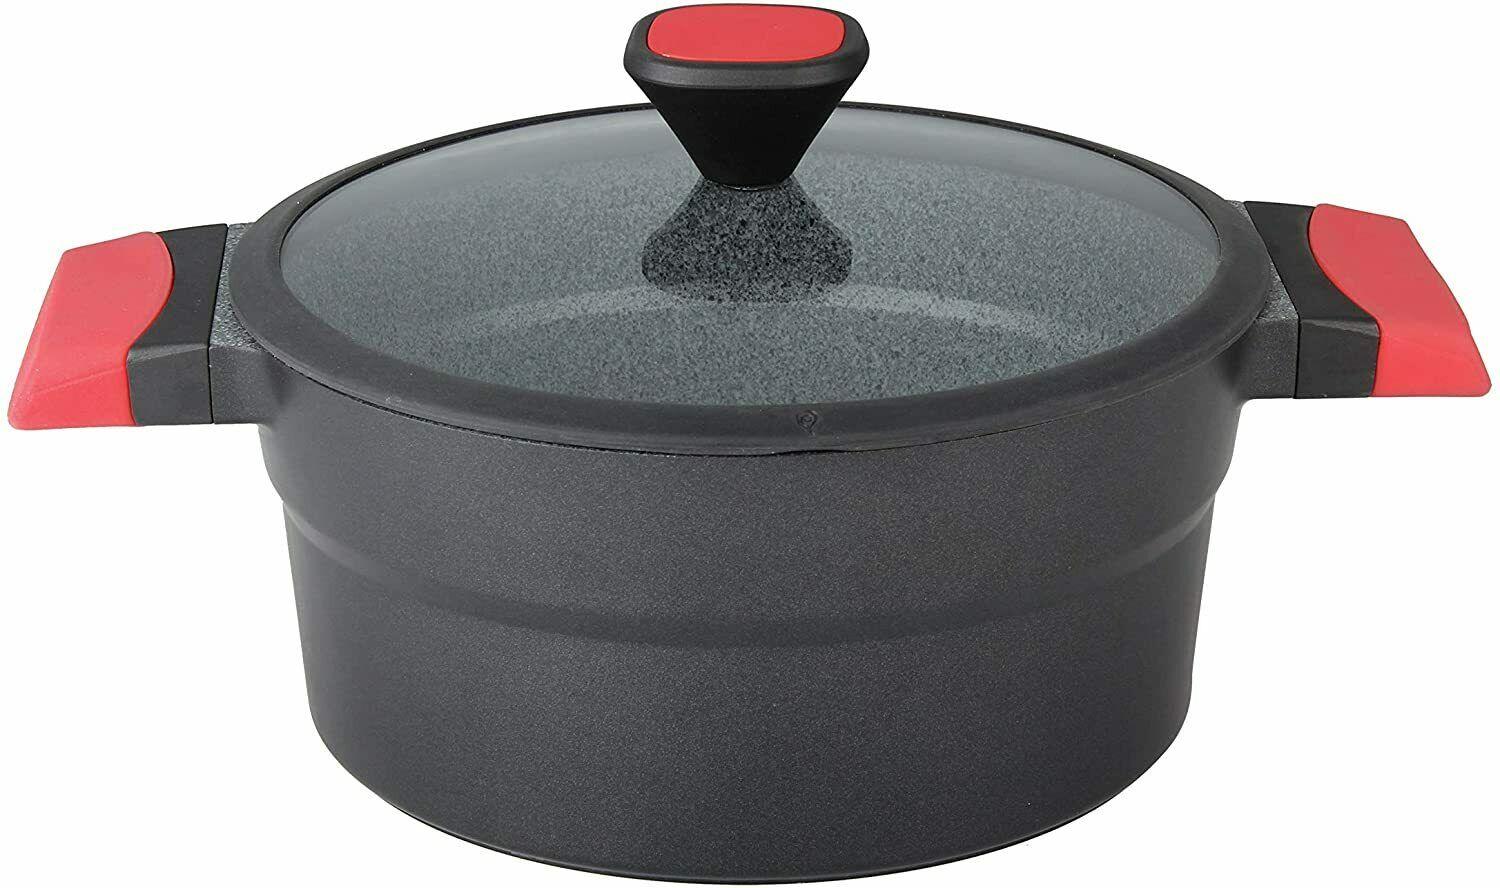 Aluminum Dutch Oven Pot with Glass Lid 4L (mystery)